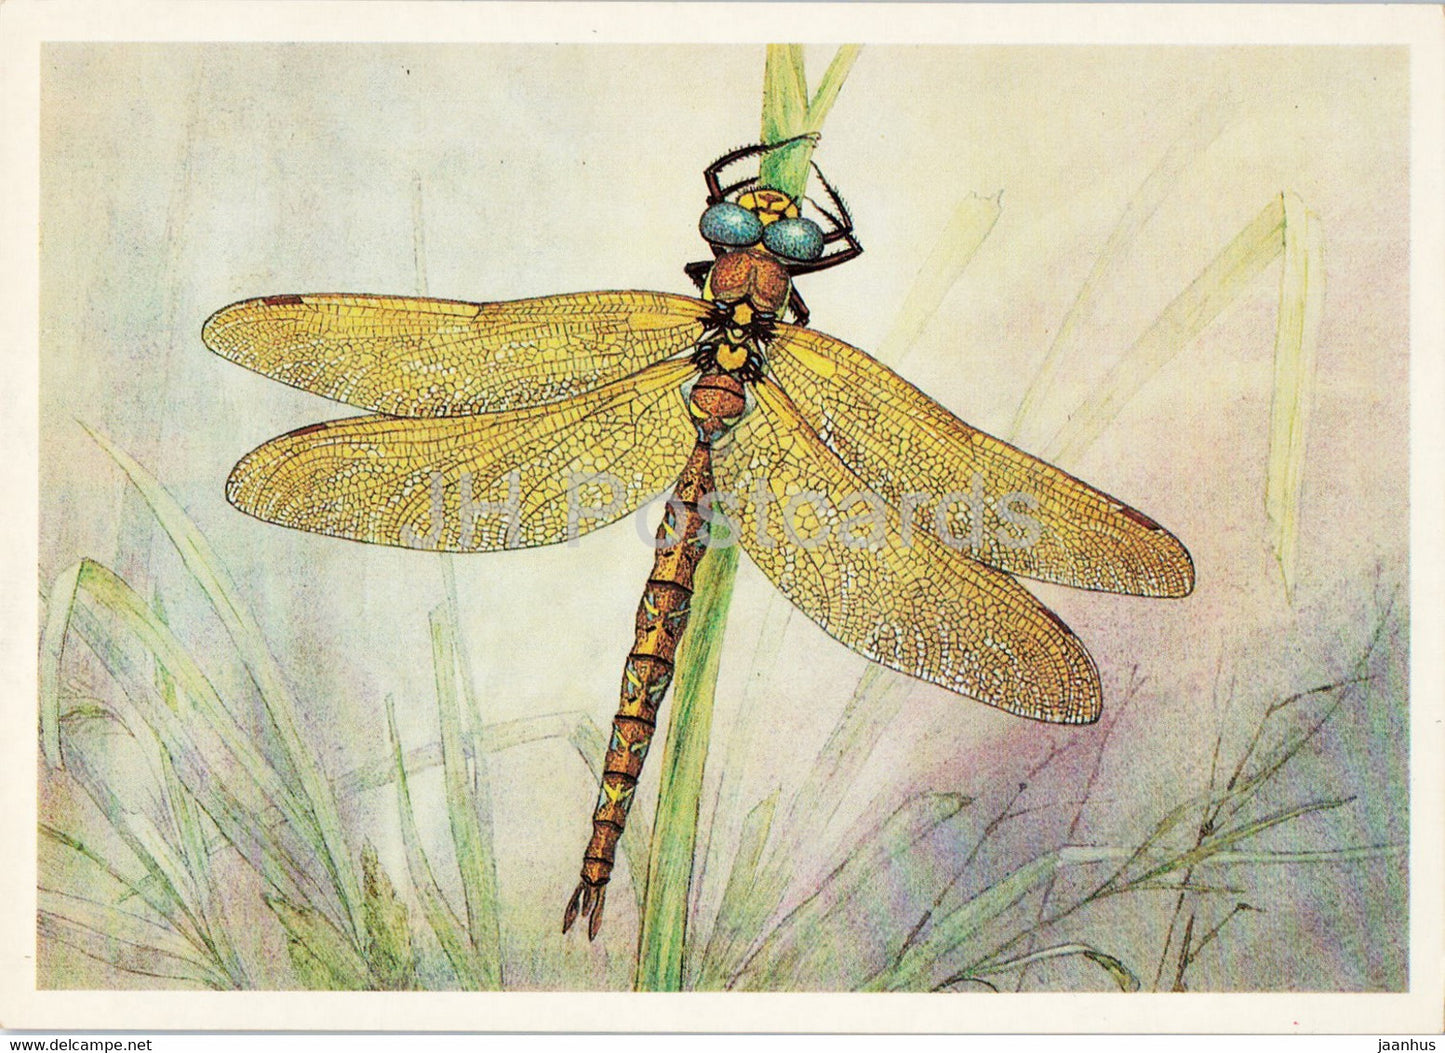 Aeshna grandis - Brown hawker - dragonfly - Insects - illustration - 1987 - Russia USSR - unused - JH Postcards